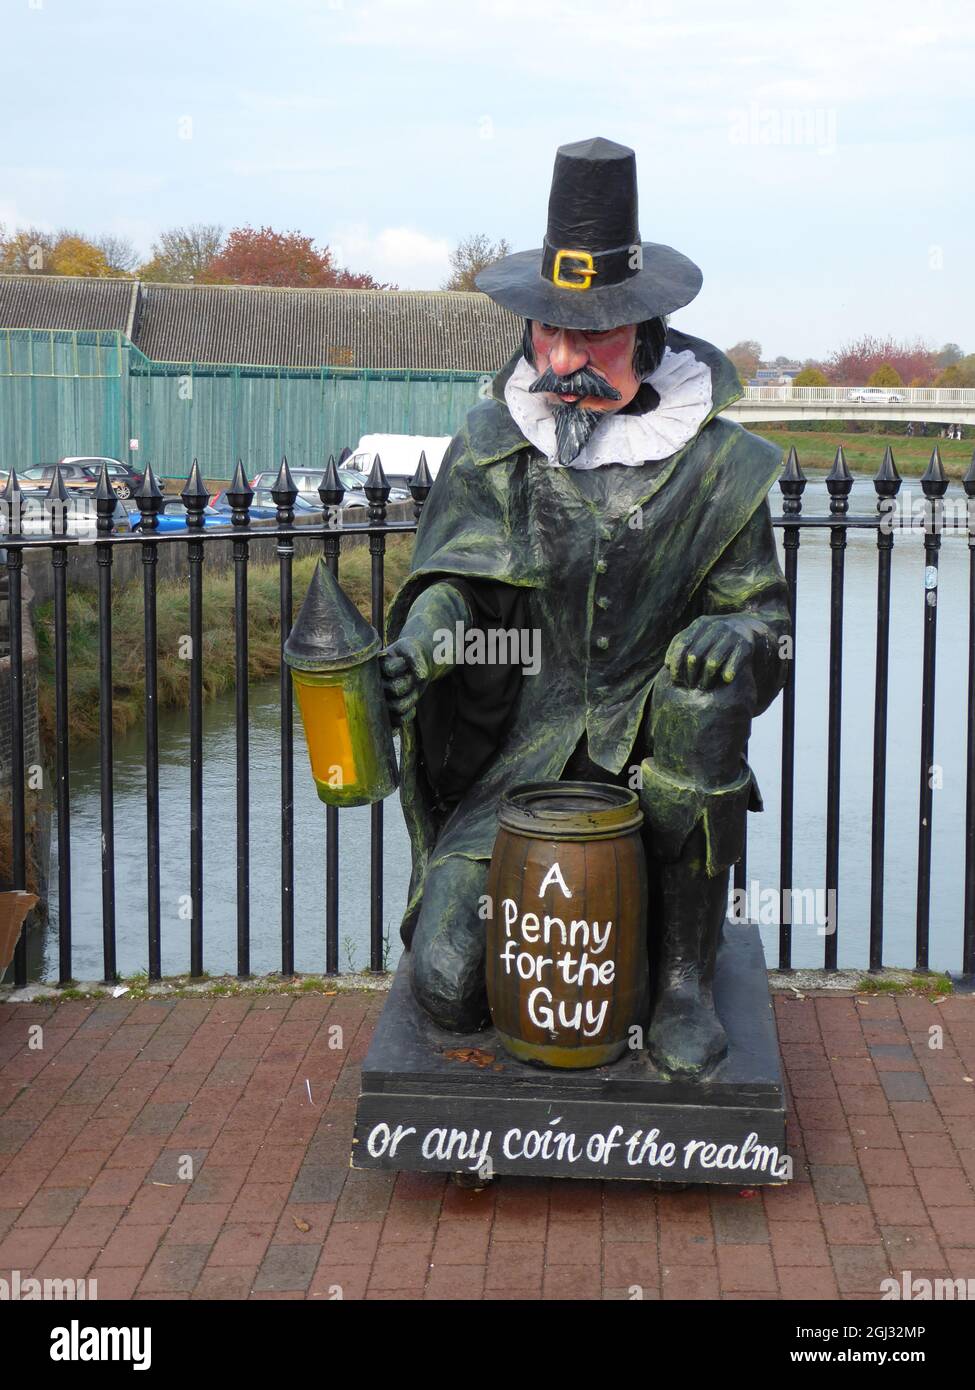 LEWE, UNITED KINGDOM - Jul 15, 2019: Effigy of Guy Fawkes in Lewes town centre saying A Penny For the Guy to collect money for a Bonfire Society towar Stock Photo